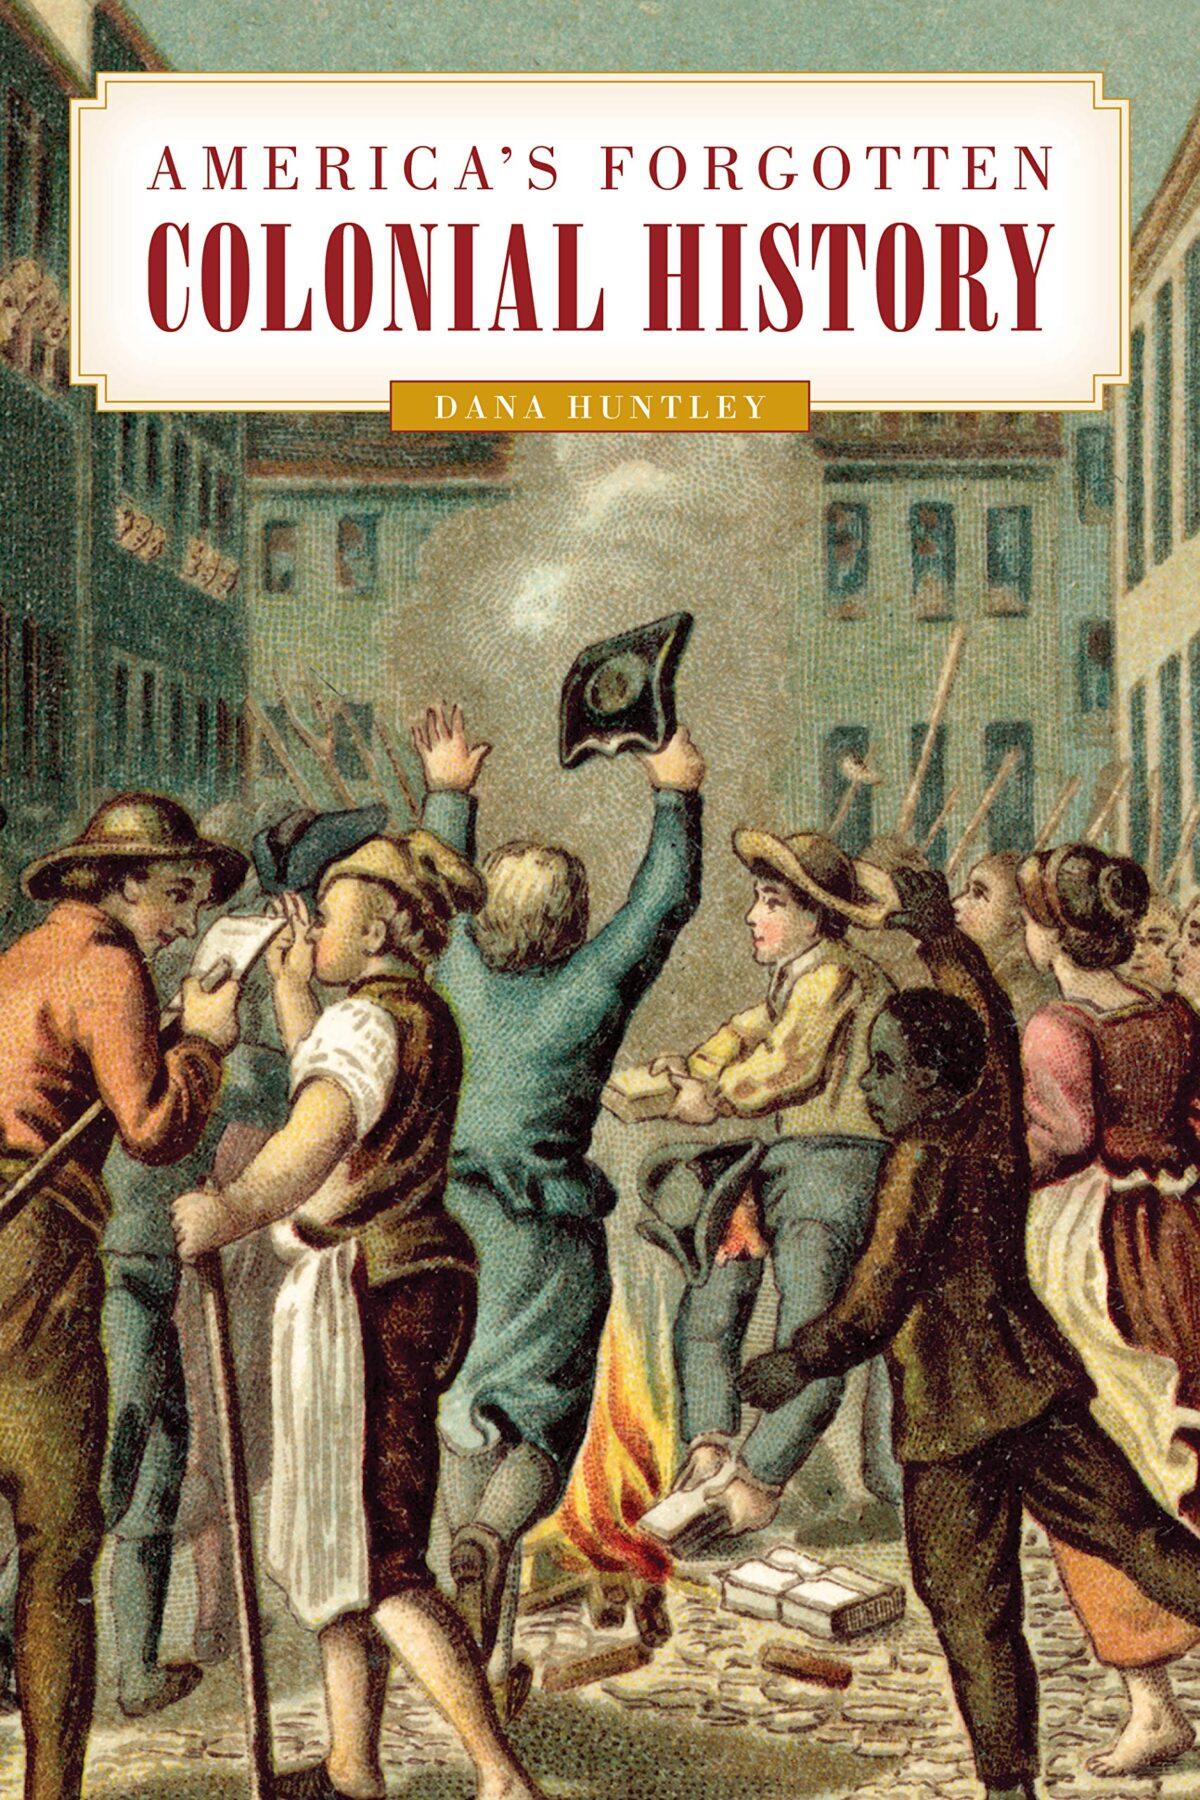 Dana Huntley's important and entertaining book on a nearly forgotten time in American colonial history.